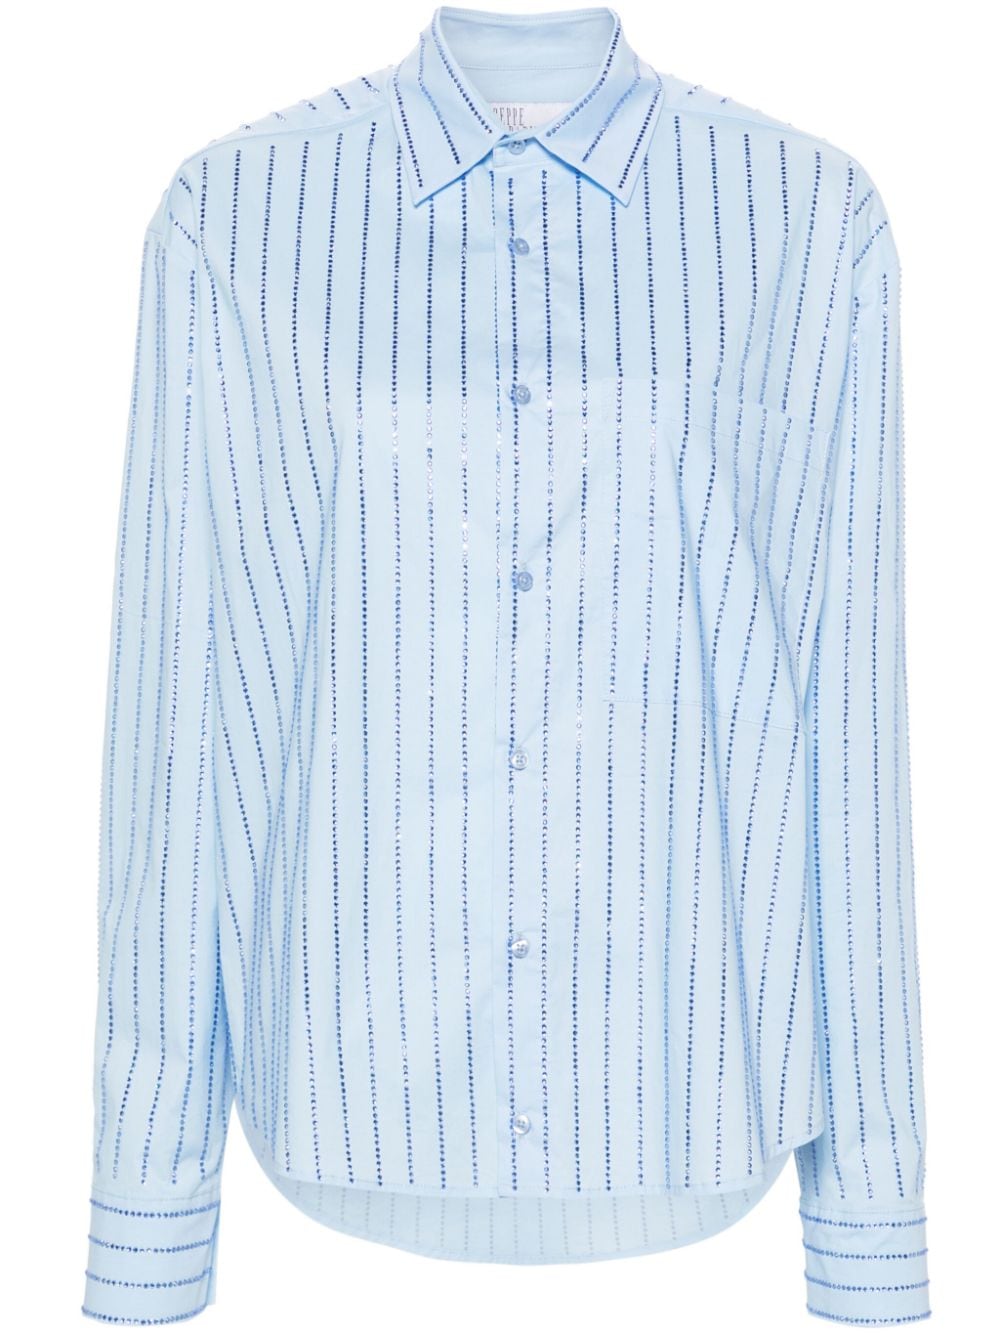 GIUSEPPE DI MORABITO Crystal Embellished Striped Shirt for Women in Light Blue - SS24